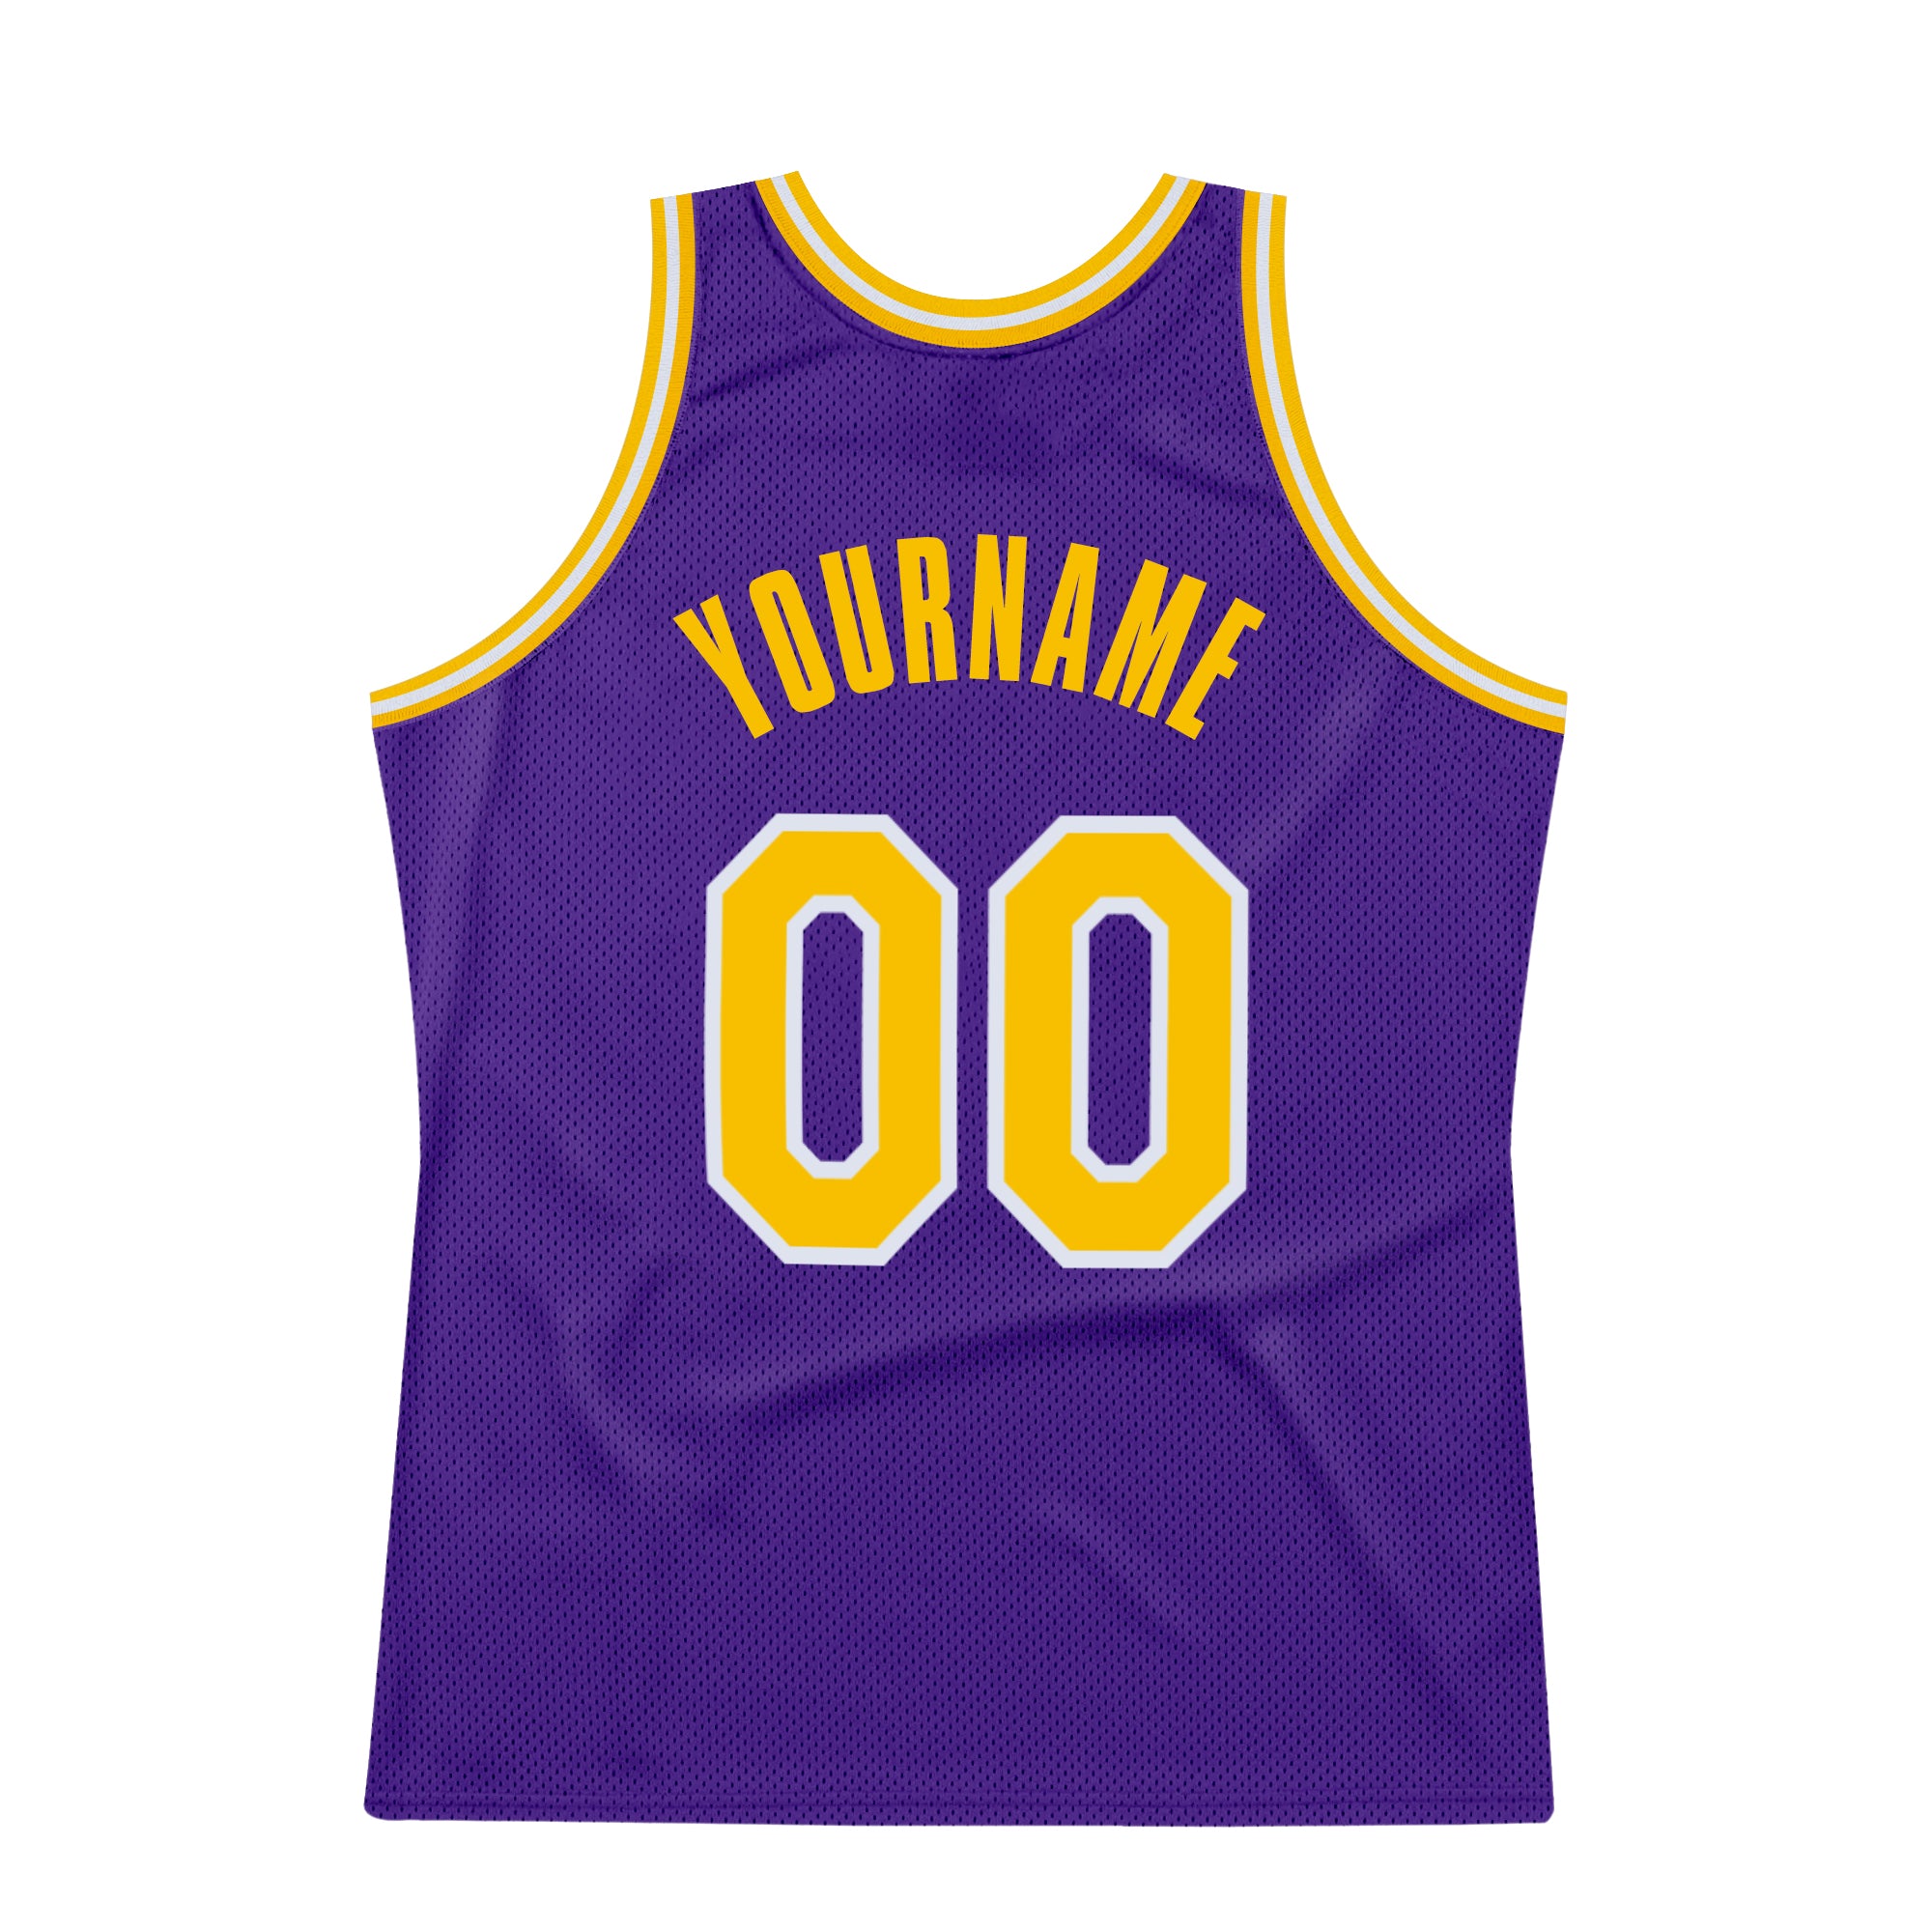 LAKERS 09 VIOLET BASKETBALL JERSEY WITH FREE CUSTOMIZE OF NAME